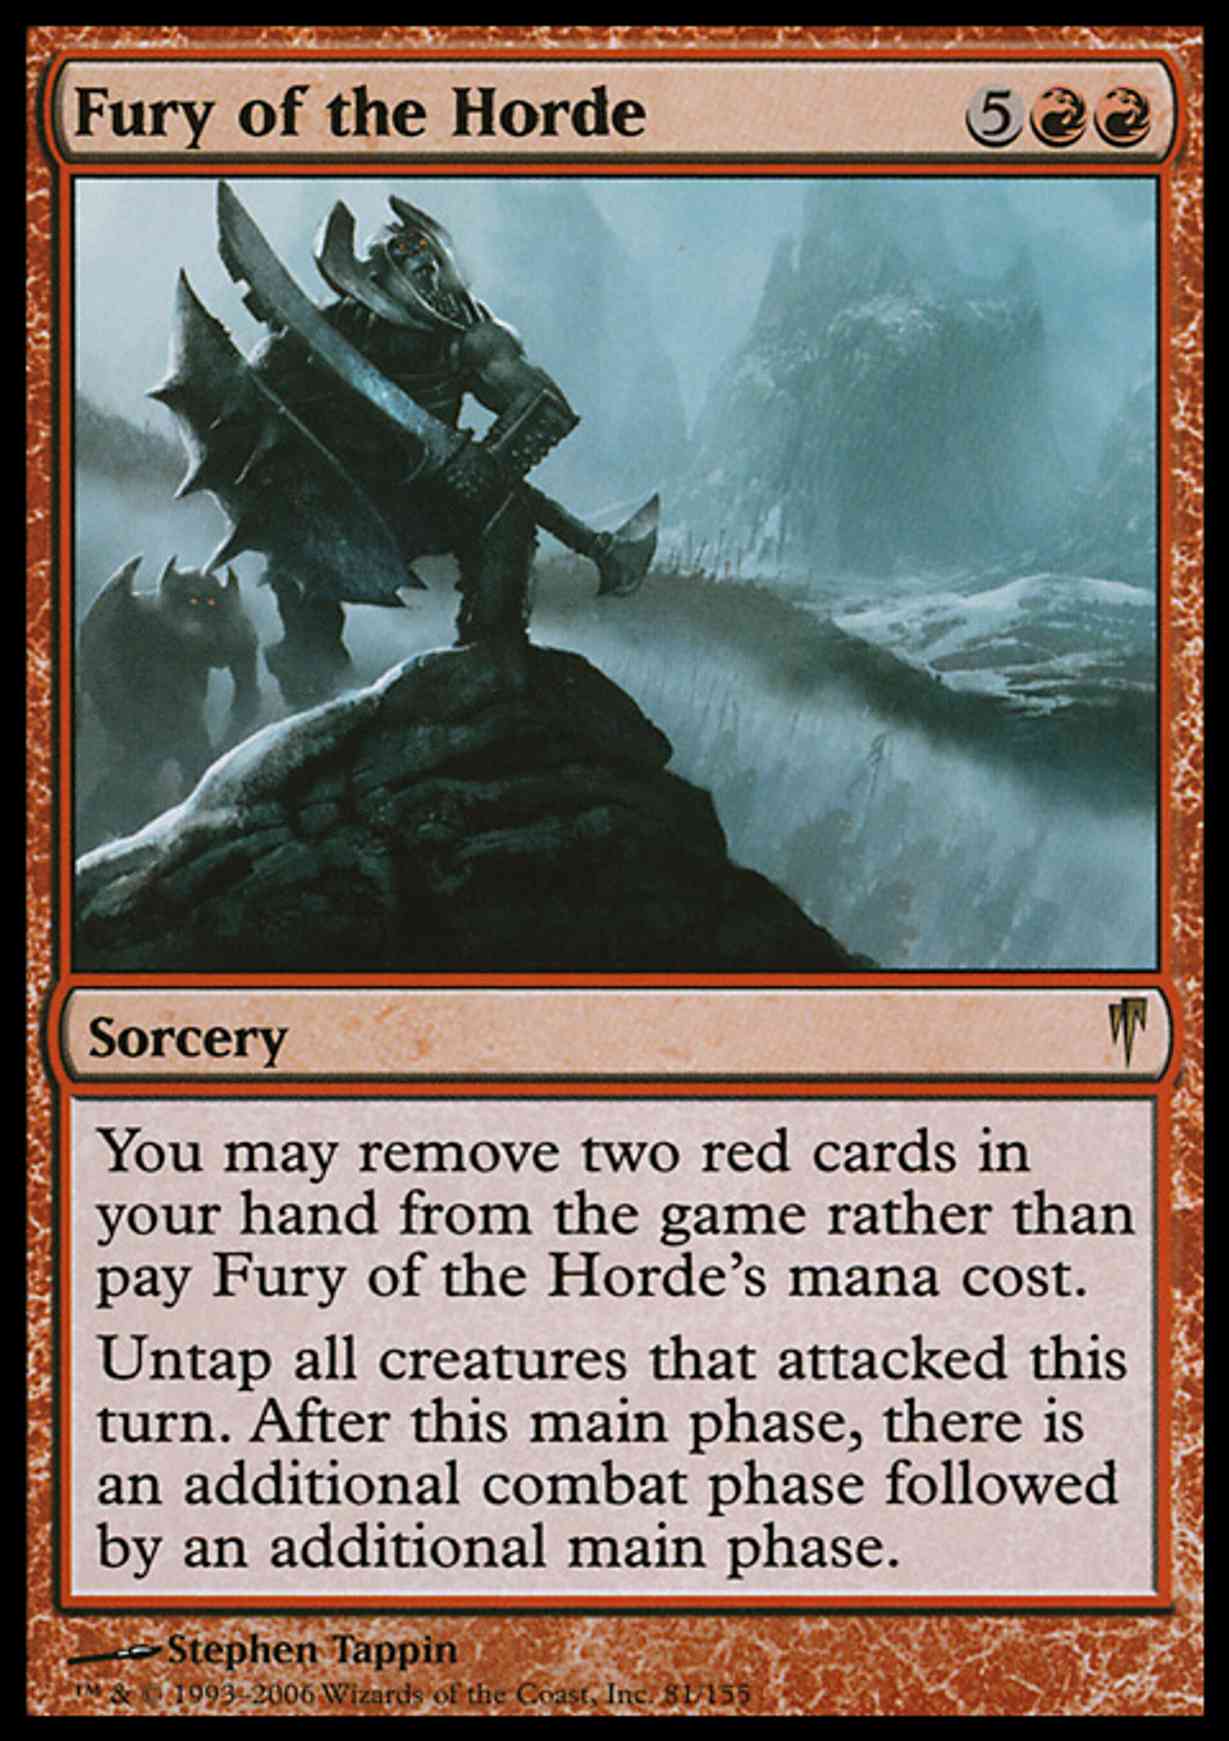 Fury of the Horde magic card front